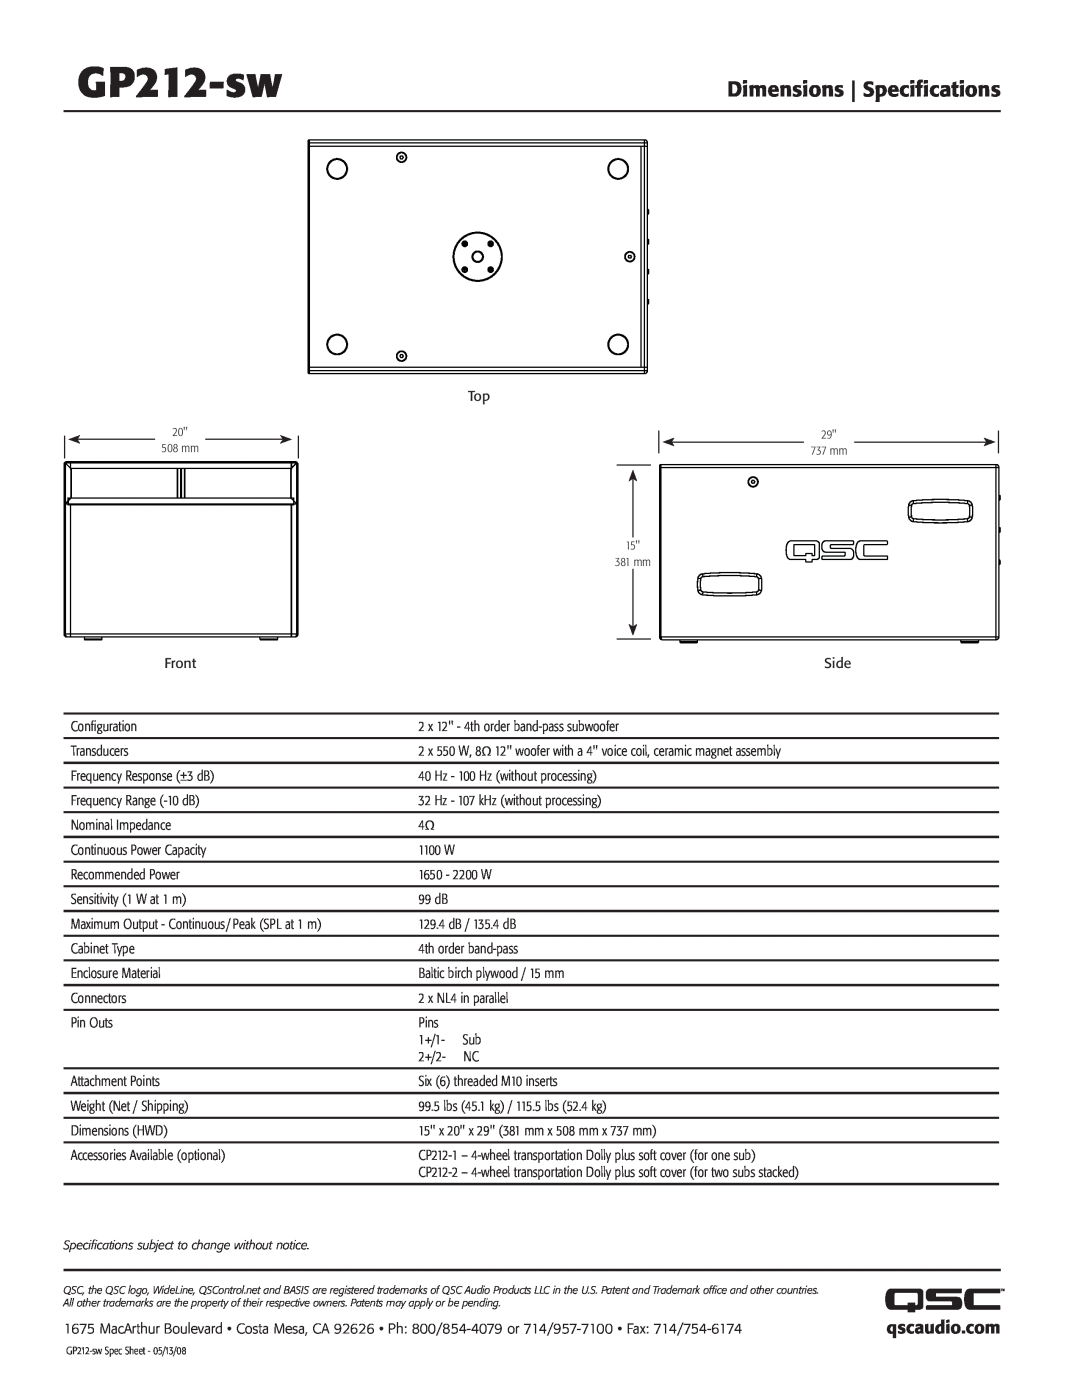 QSC Audio GP212-sw manual Dimensions Specifications 